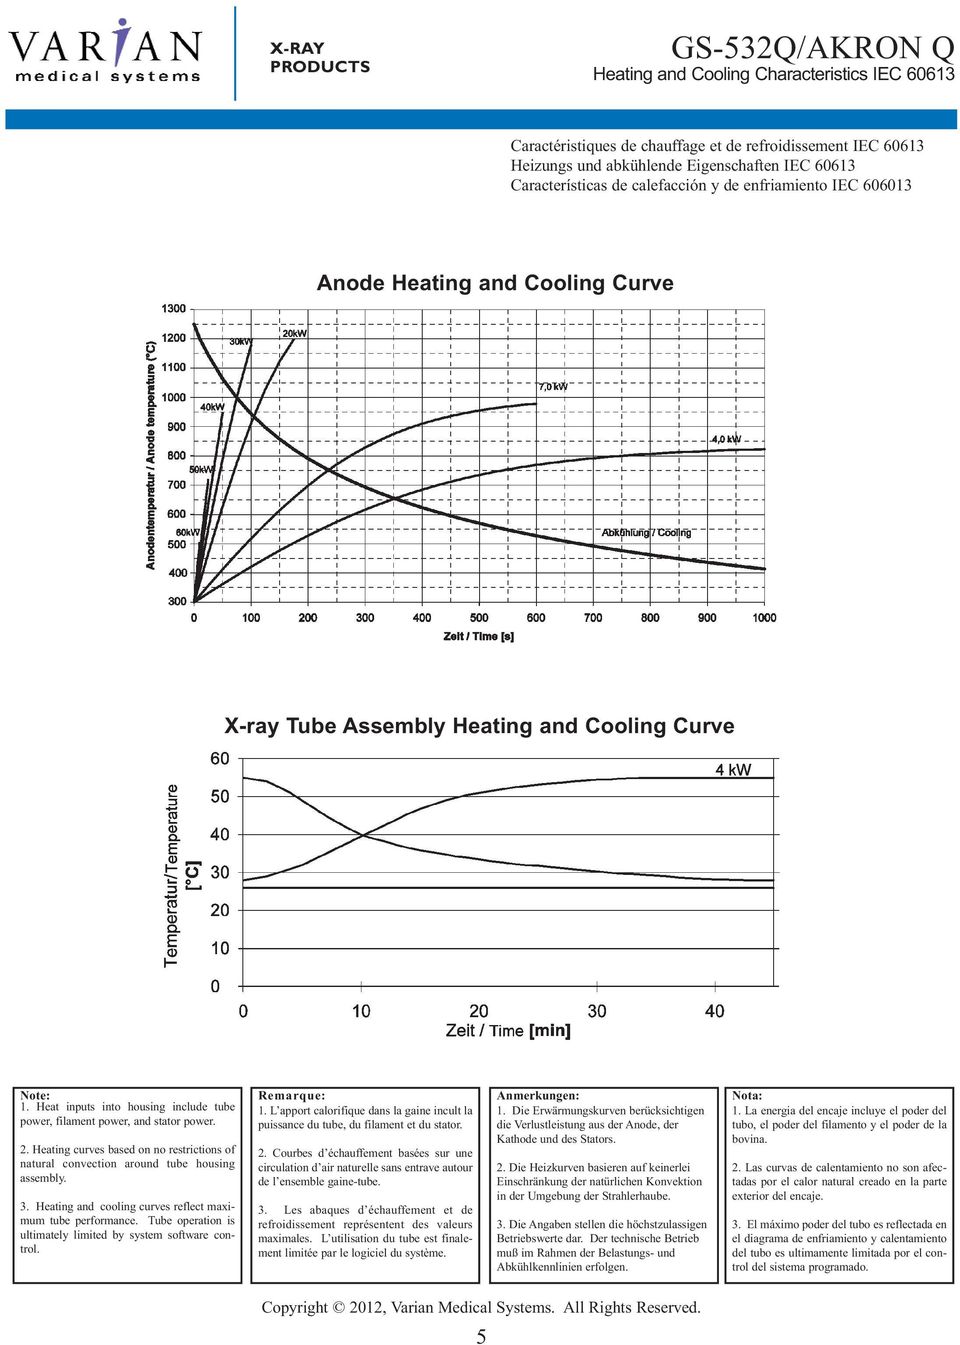 Heating curves based on no restrictions of natural convection around tube housing assembly. 3. Heating and cooling curves reflect maximum tube performance.